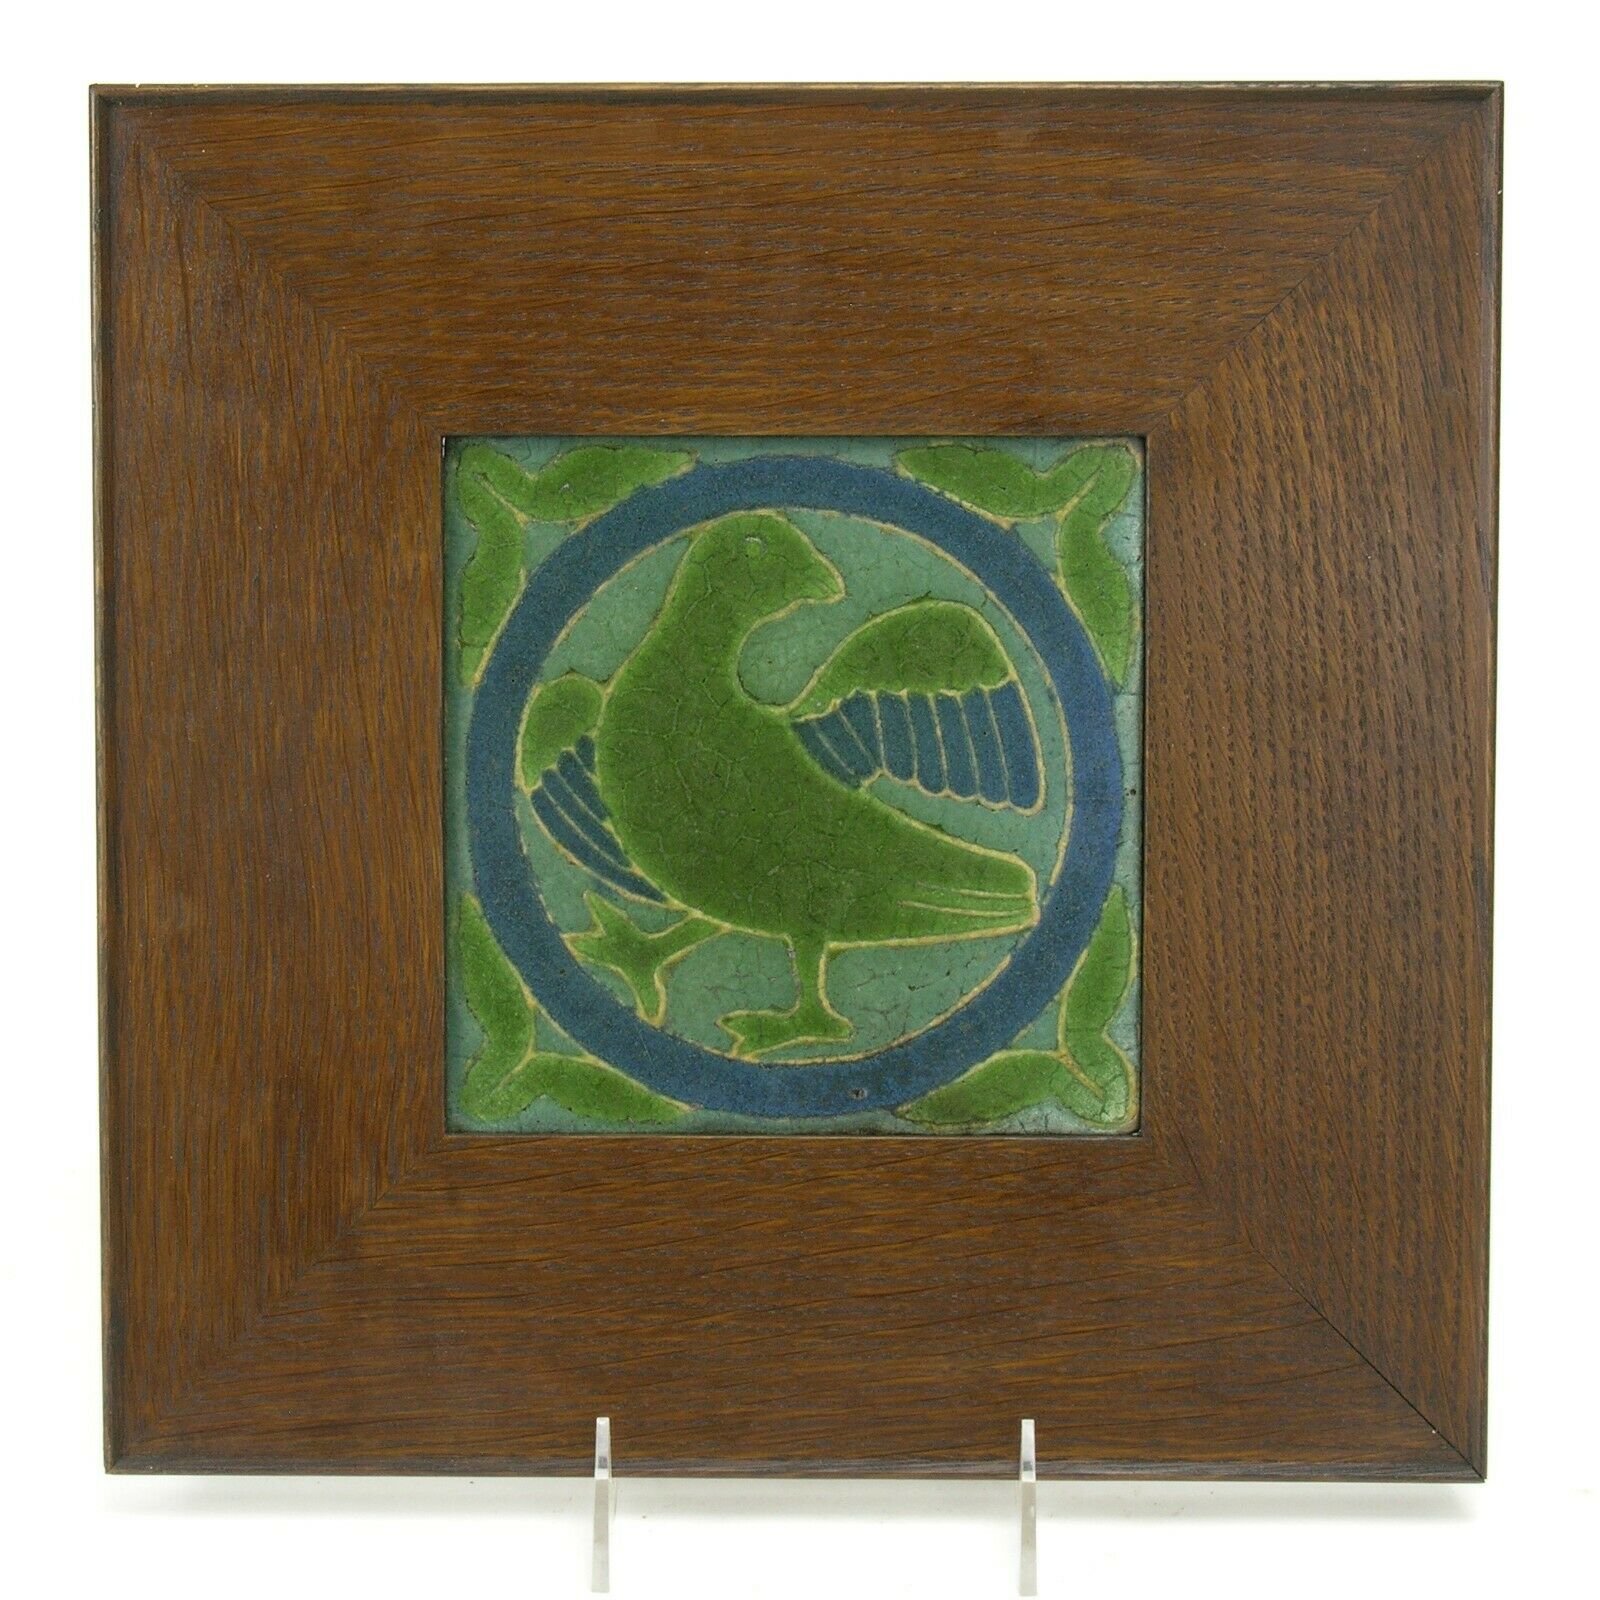 Grueby Pottery Faience 6x6 Bird In Circle Tile Arts & Crafts Matte Green Blue